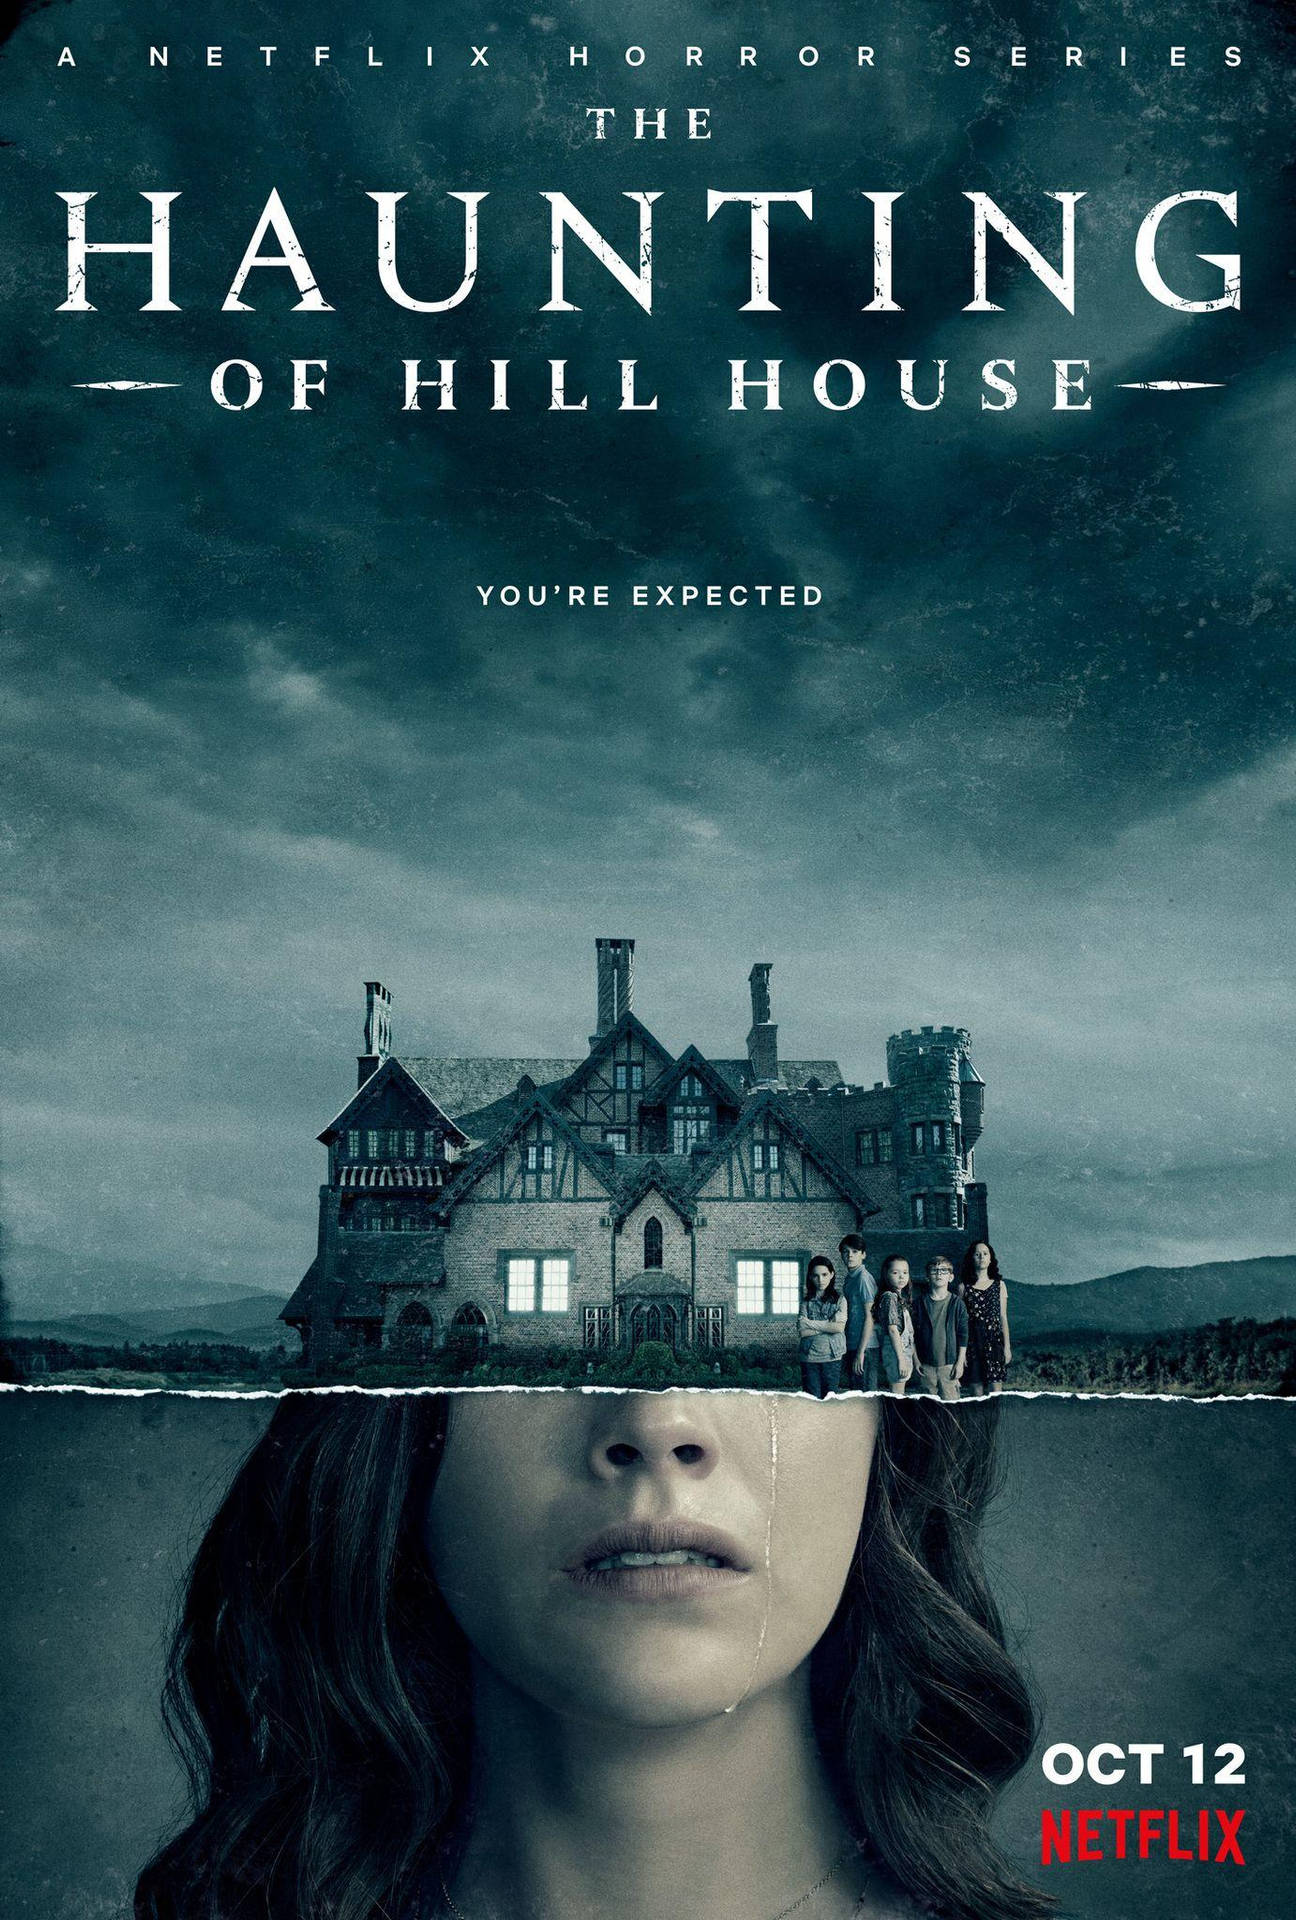 The Haunting Of Hill House Horror Series